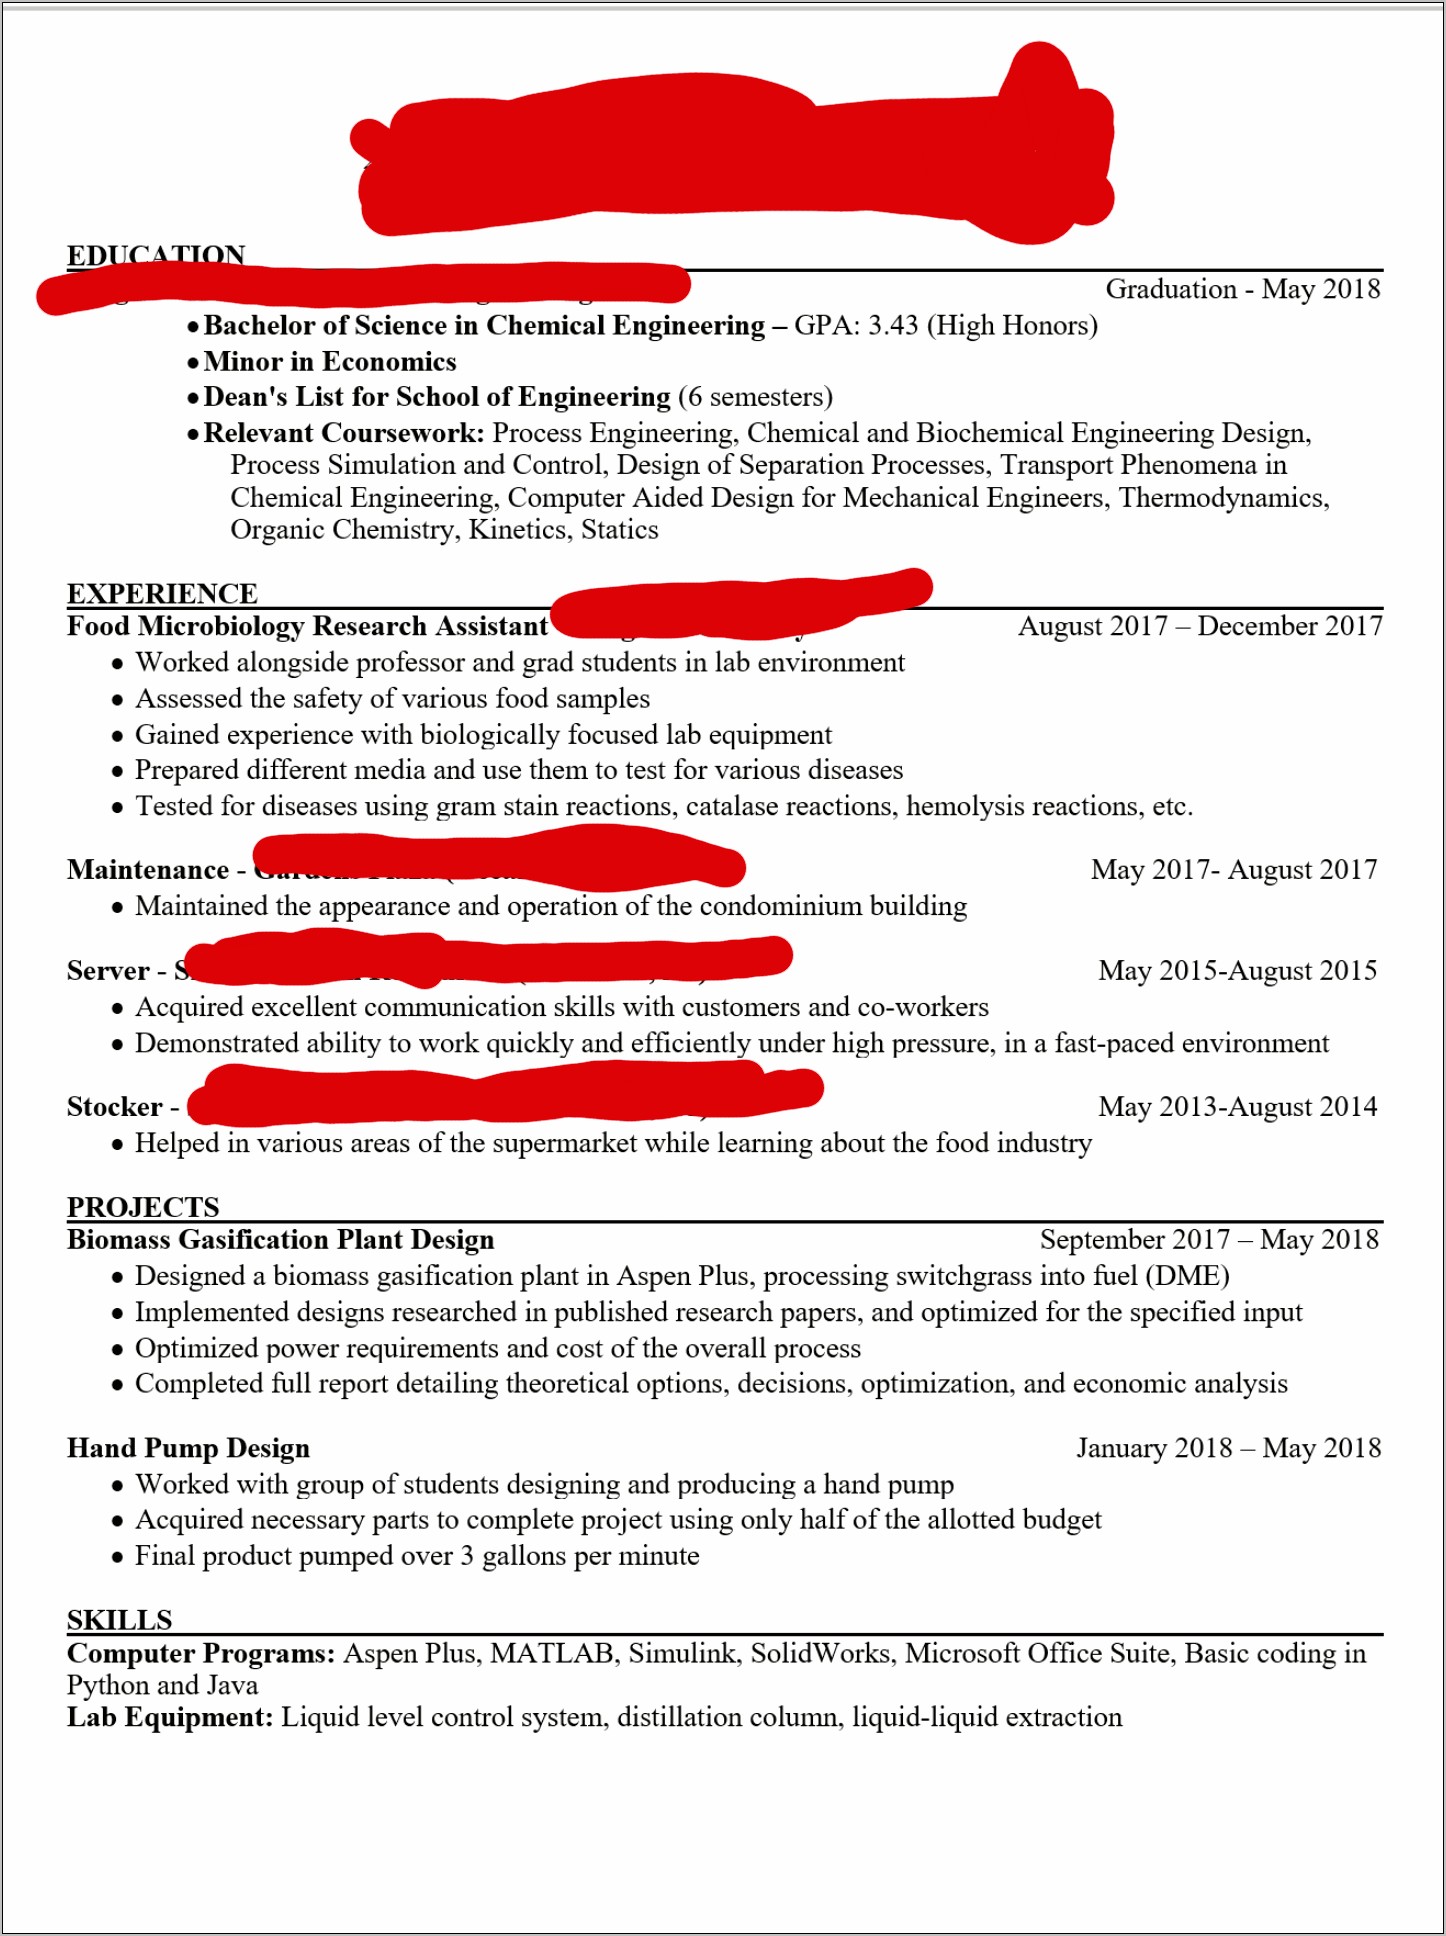 Resume Chemistry Less Than A Year Experience